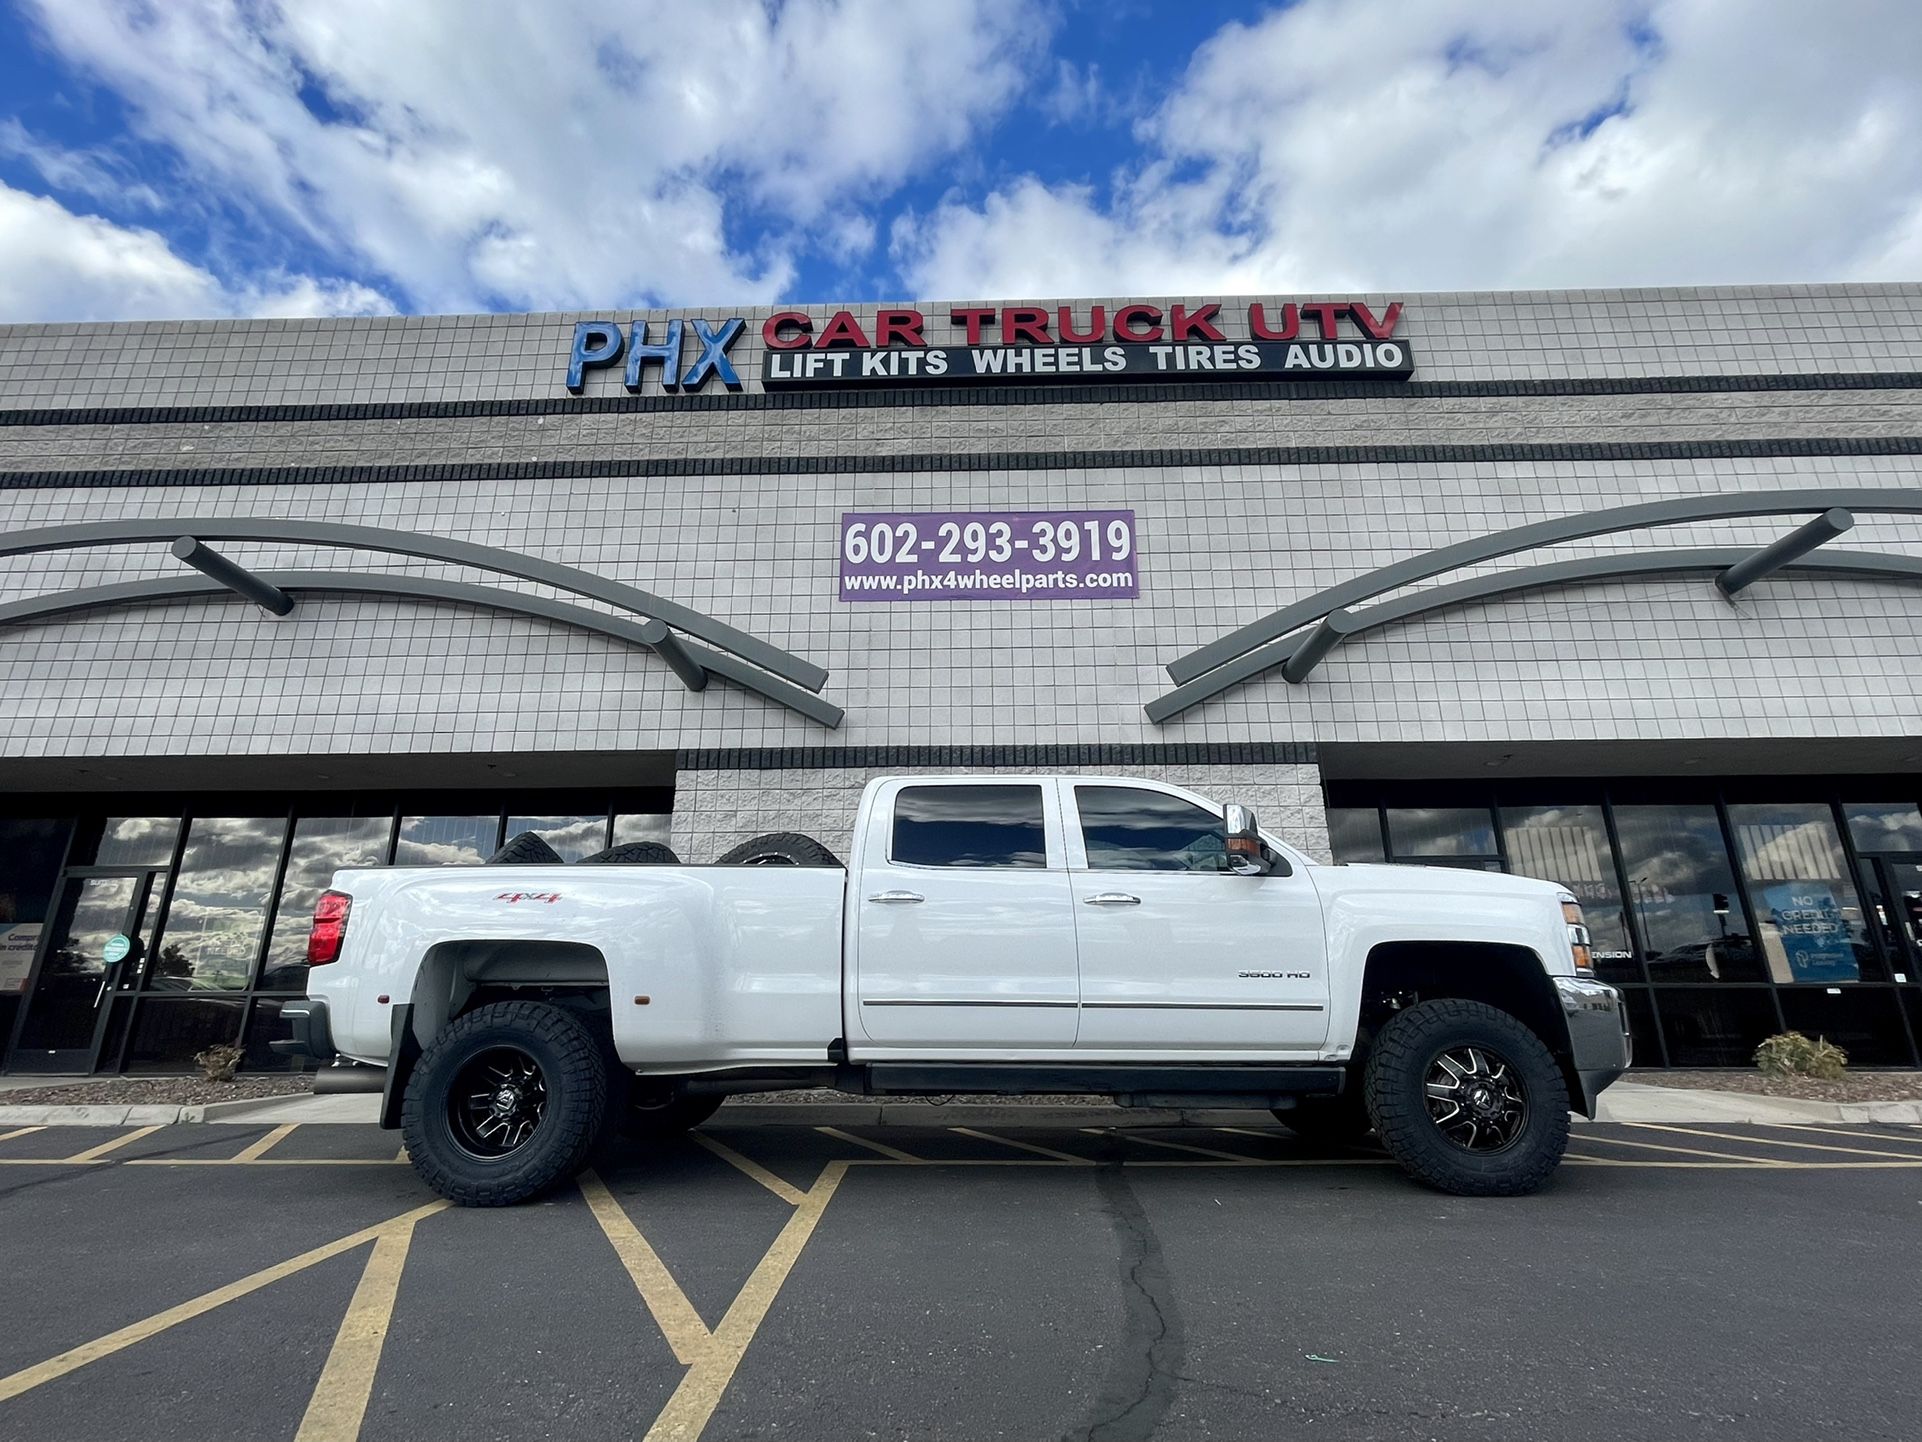 Dually-Truck Leveling & Lift Kits Wheels Tires Installations.